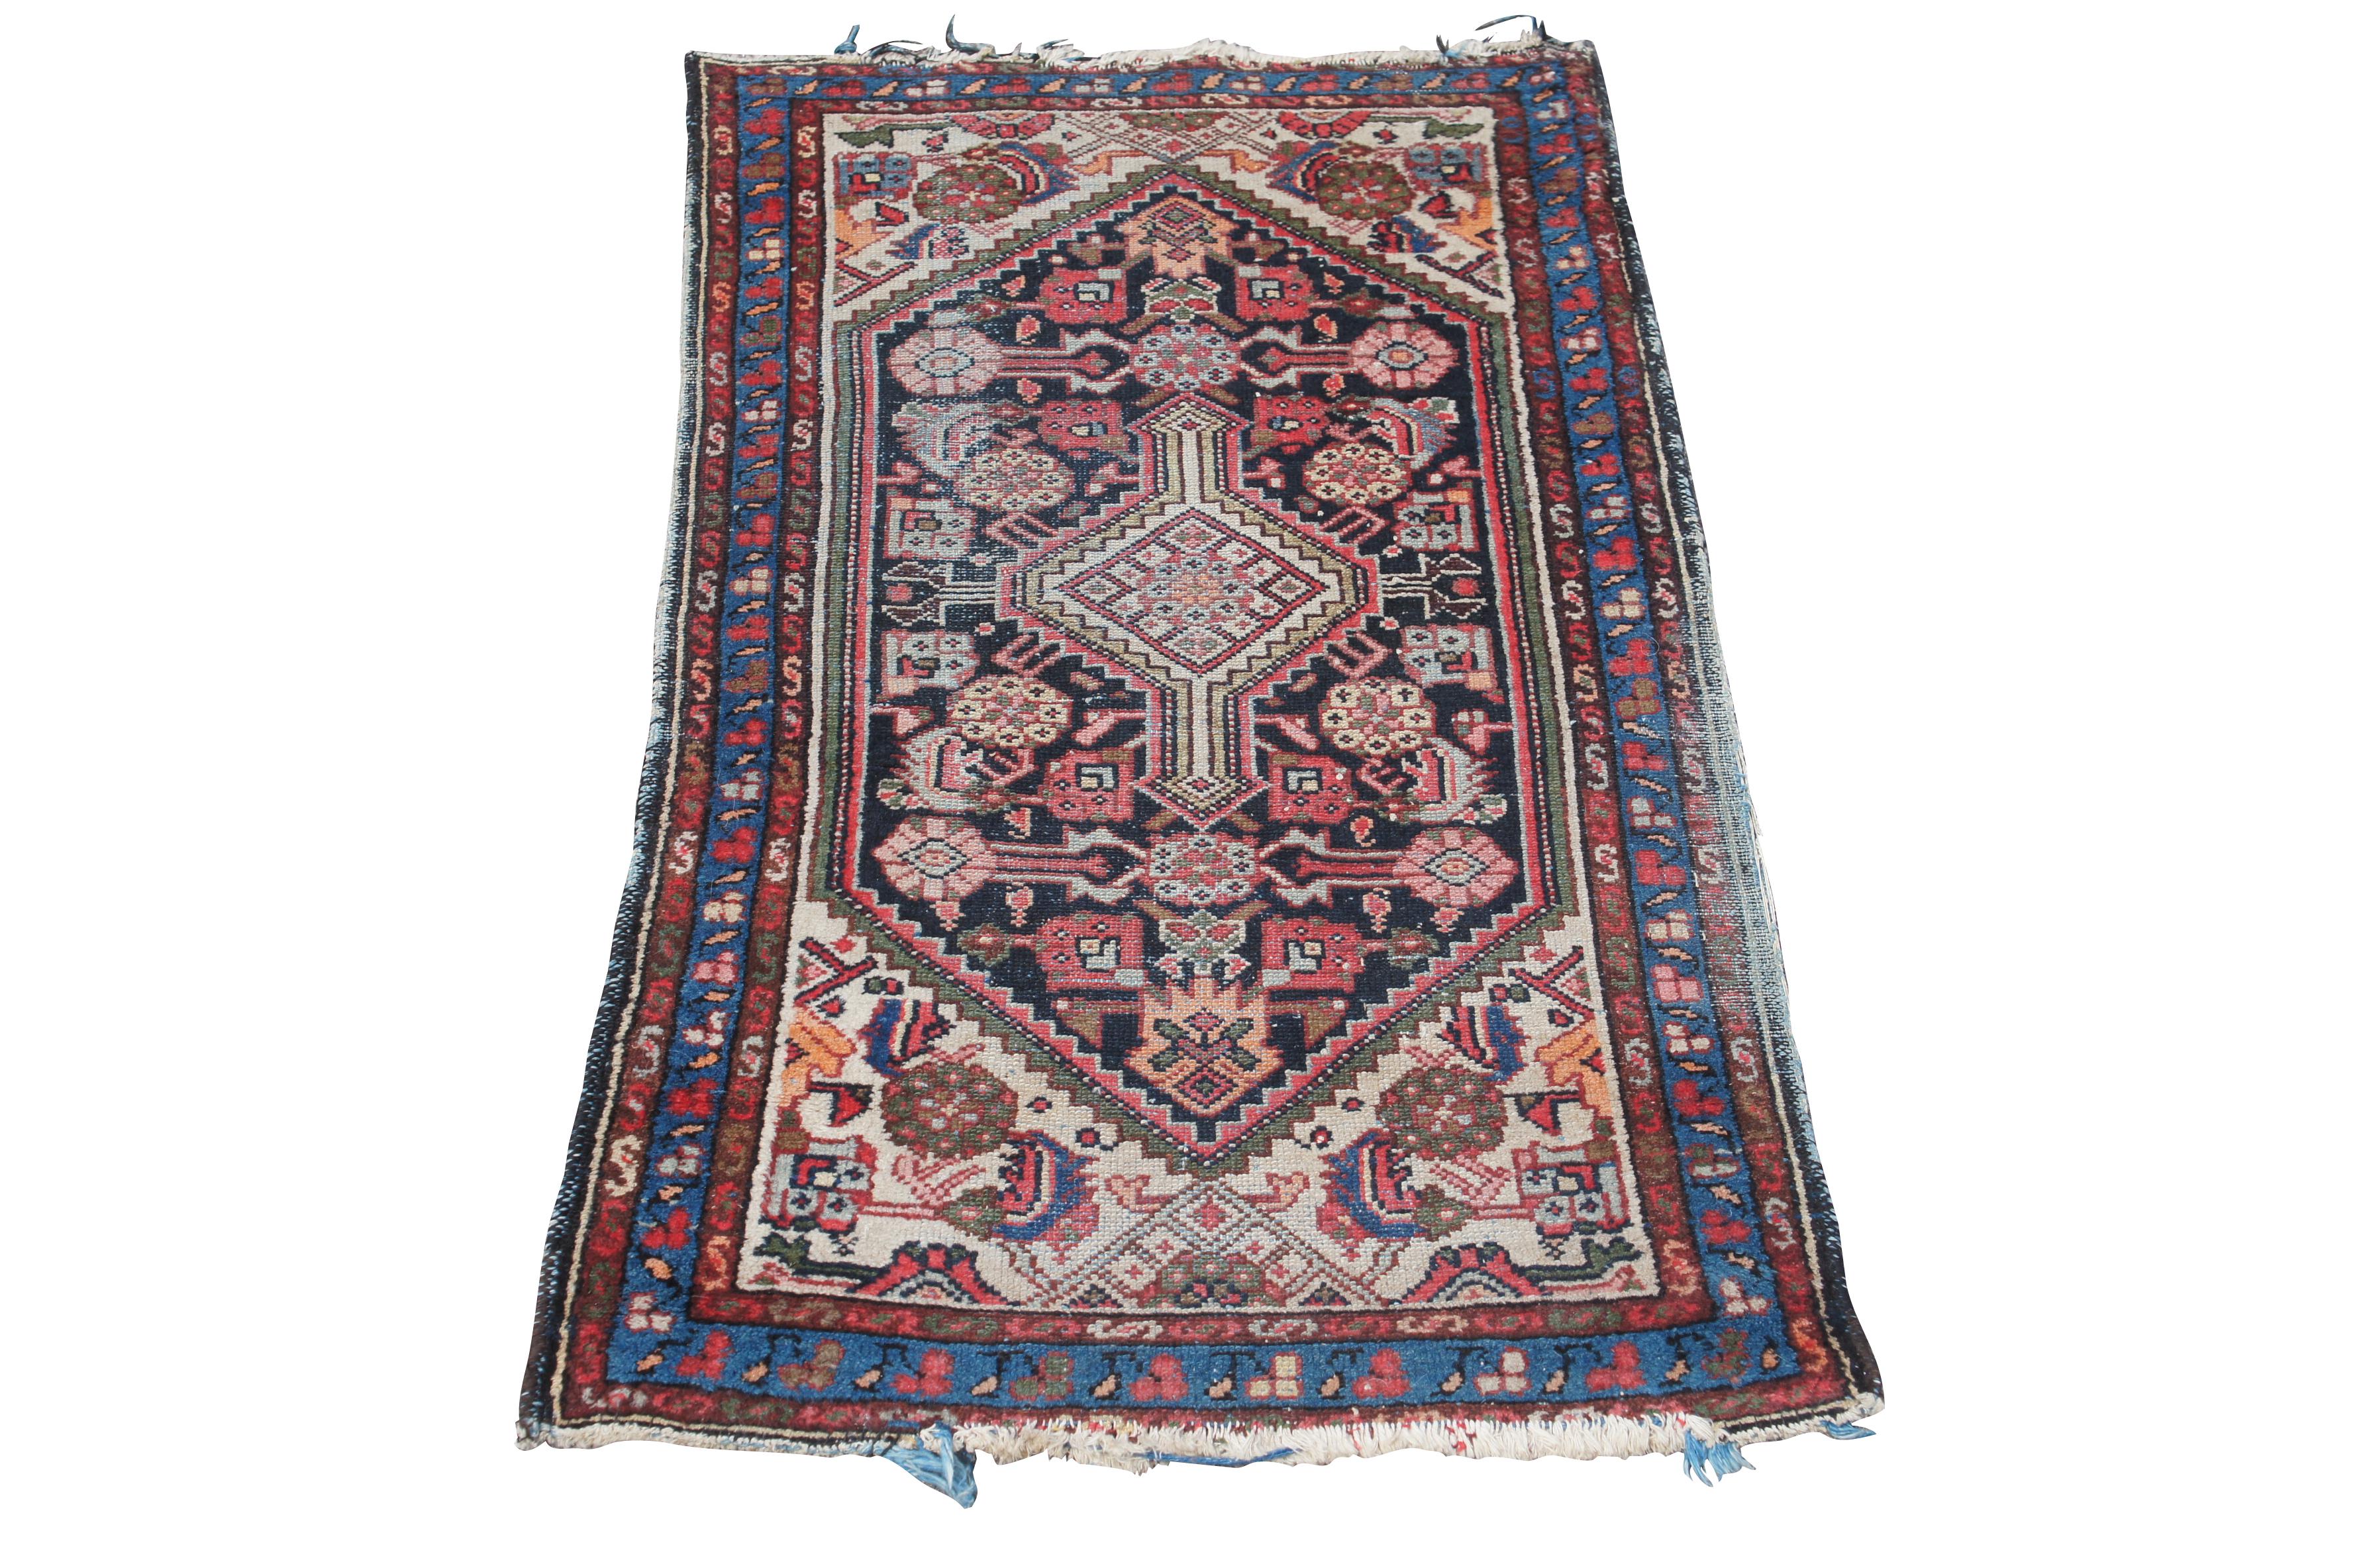 A lovely vintage prayer rug or mat. Features a geometric design with reds and blues accented by green, orange and beige.   

Persian Kurdish rugs are a type of rug that show Persian influence in both design and quality. They are finer, more